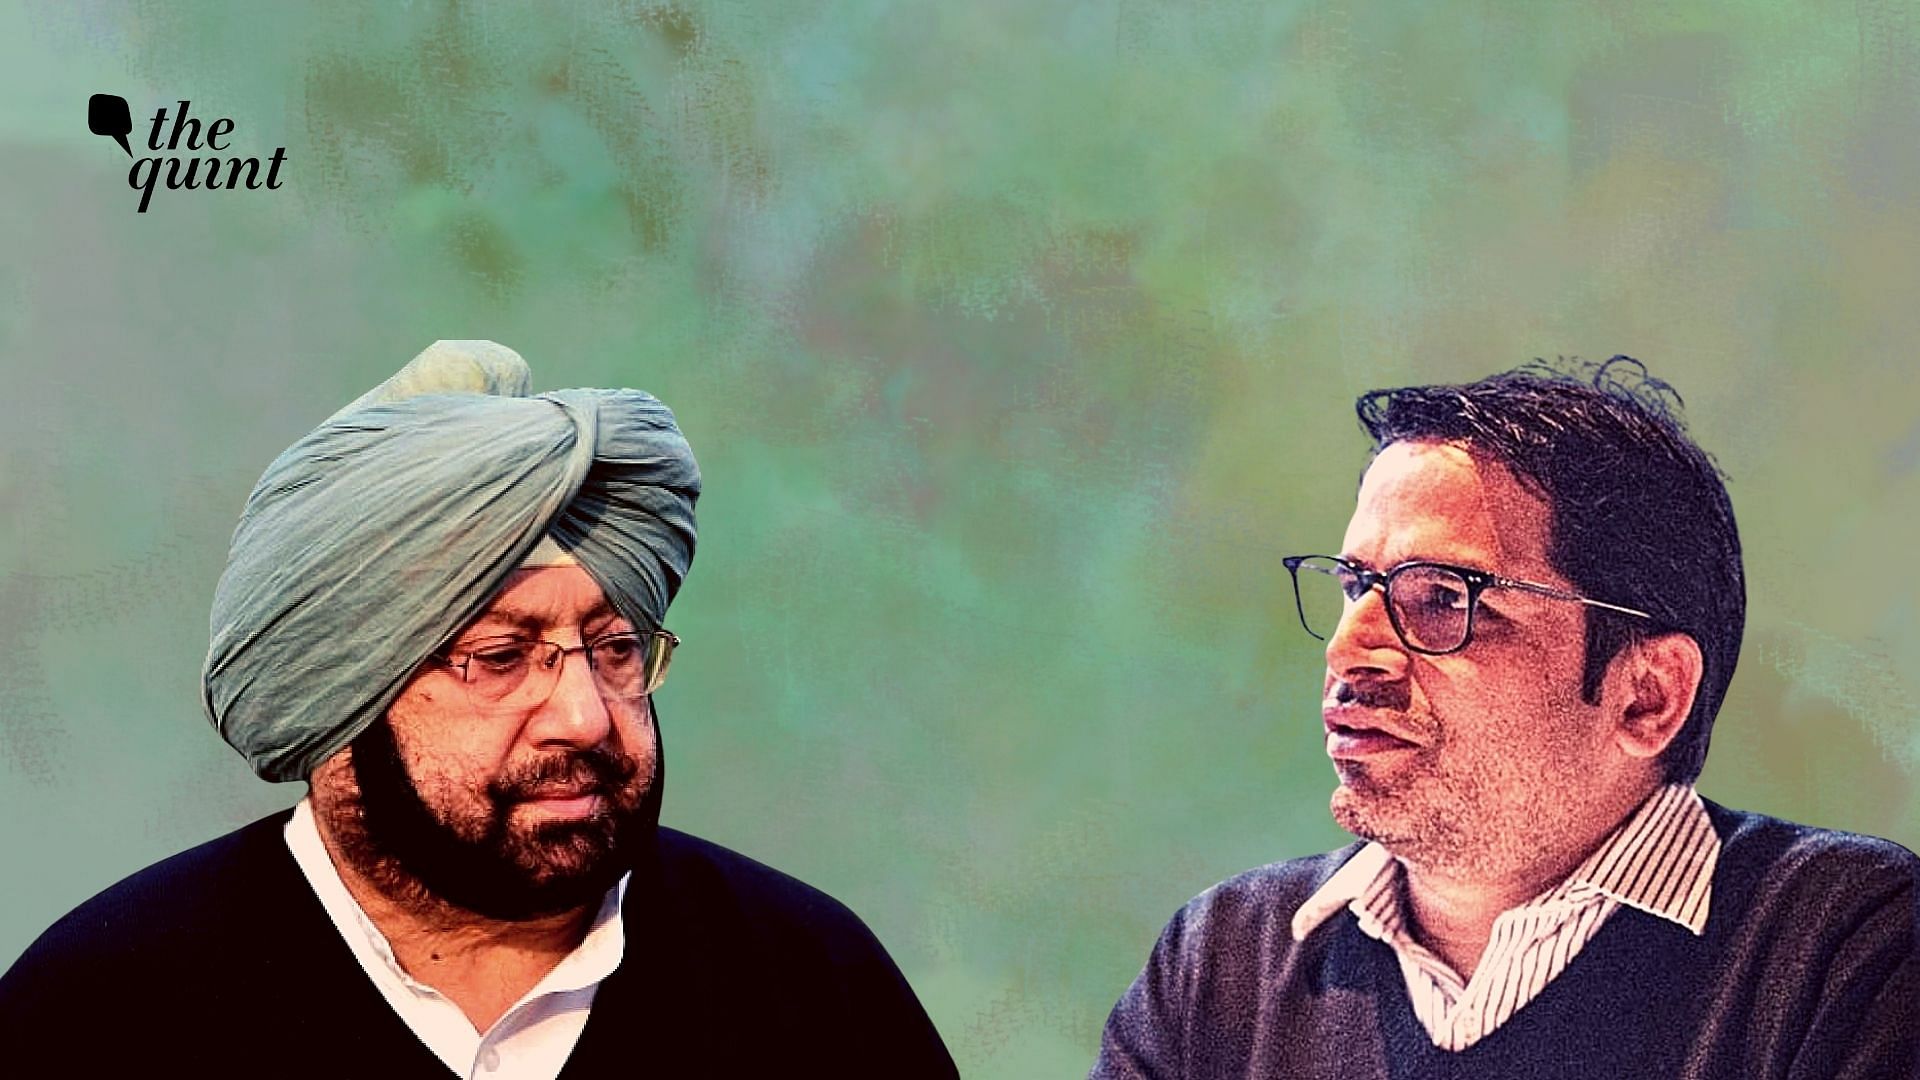 Political strategist Prashant Kishor has joined Punjab Chief Minister Amarinder Singh’s team as his political advisor, Singh said in a tweet on Monday, 1 March.